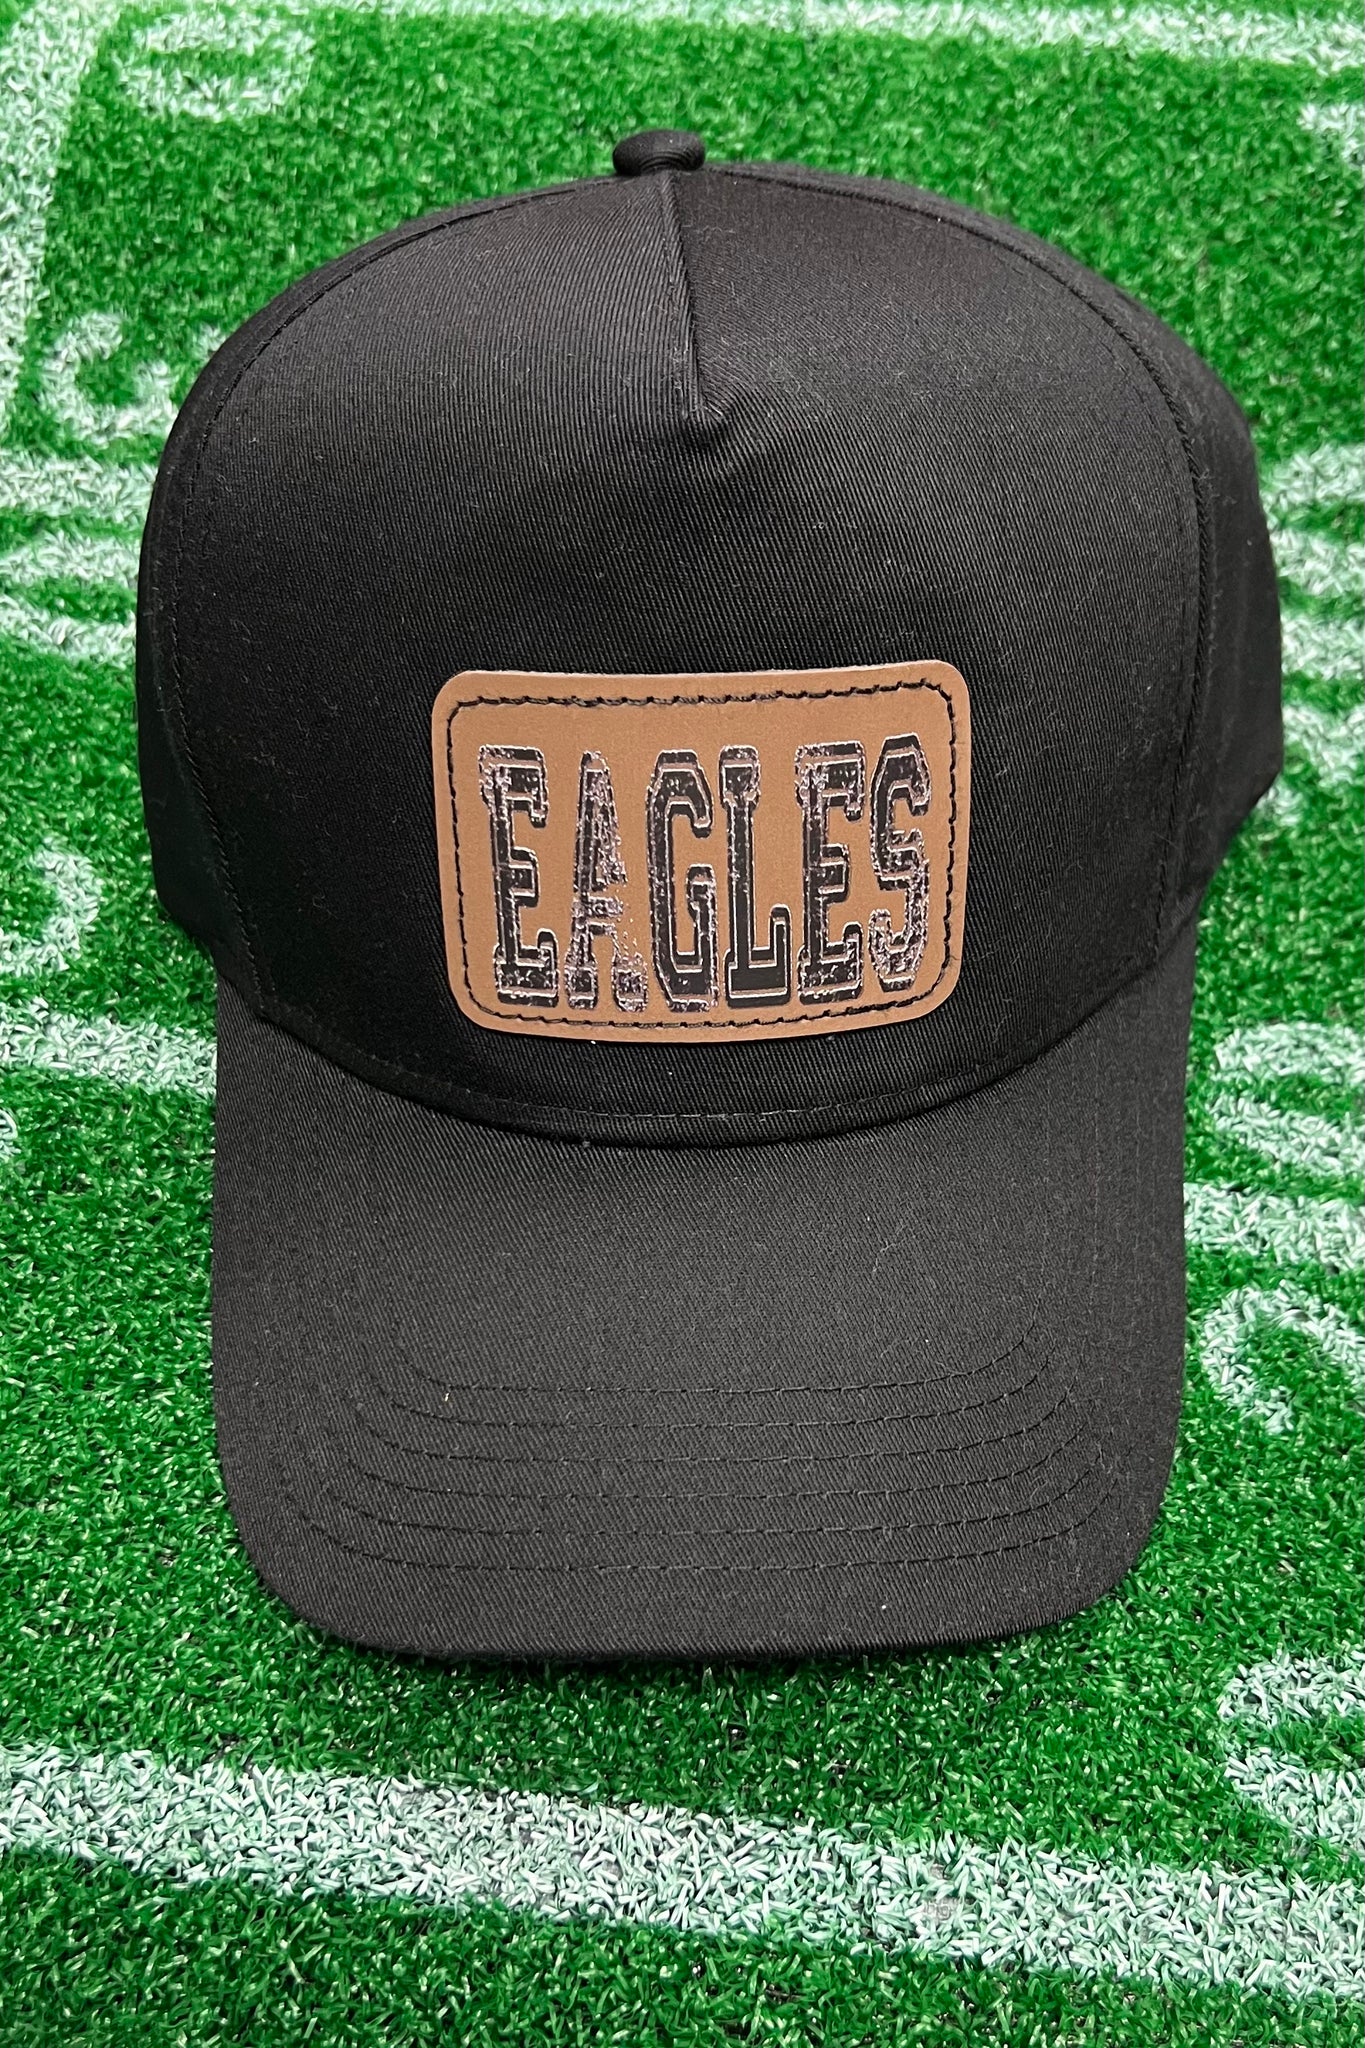 Eagles Hats for Guys